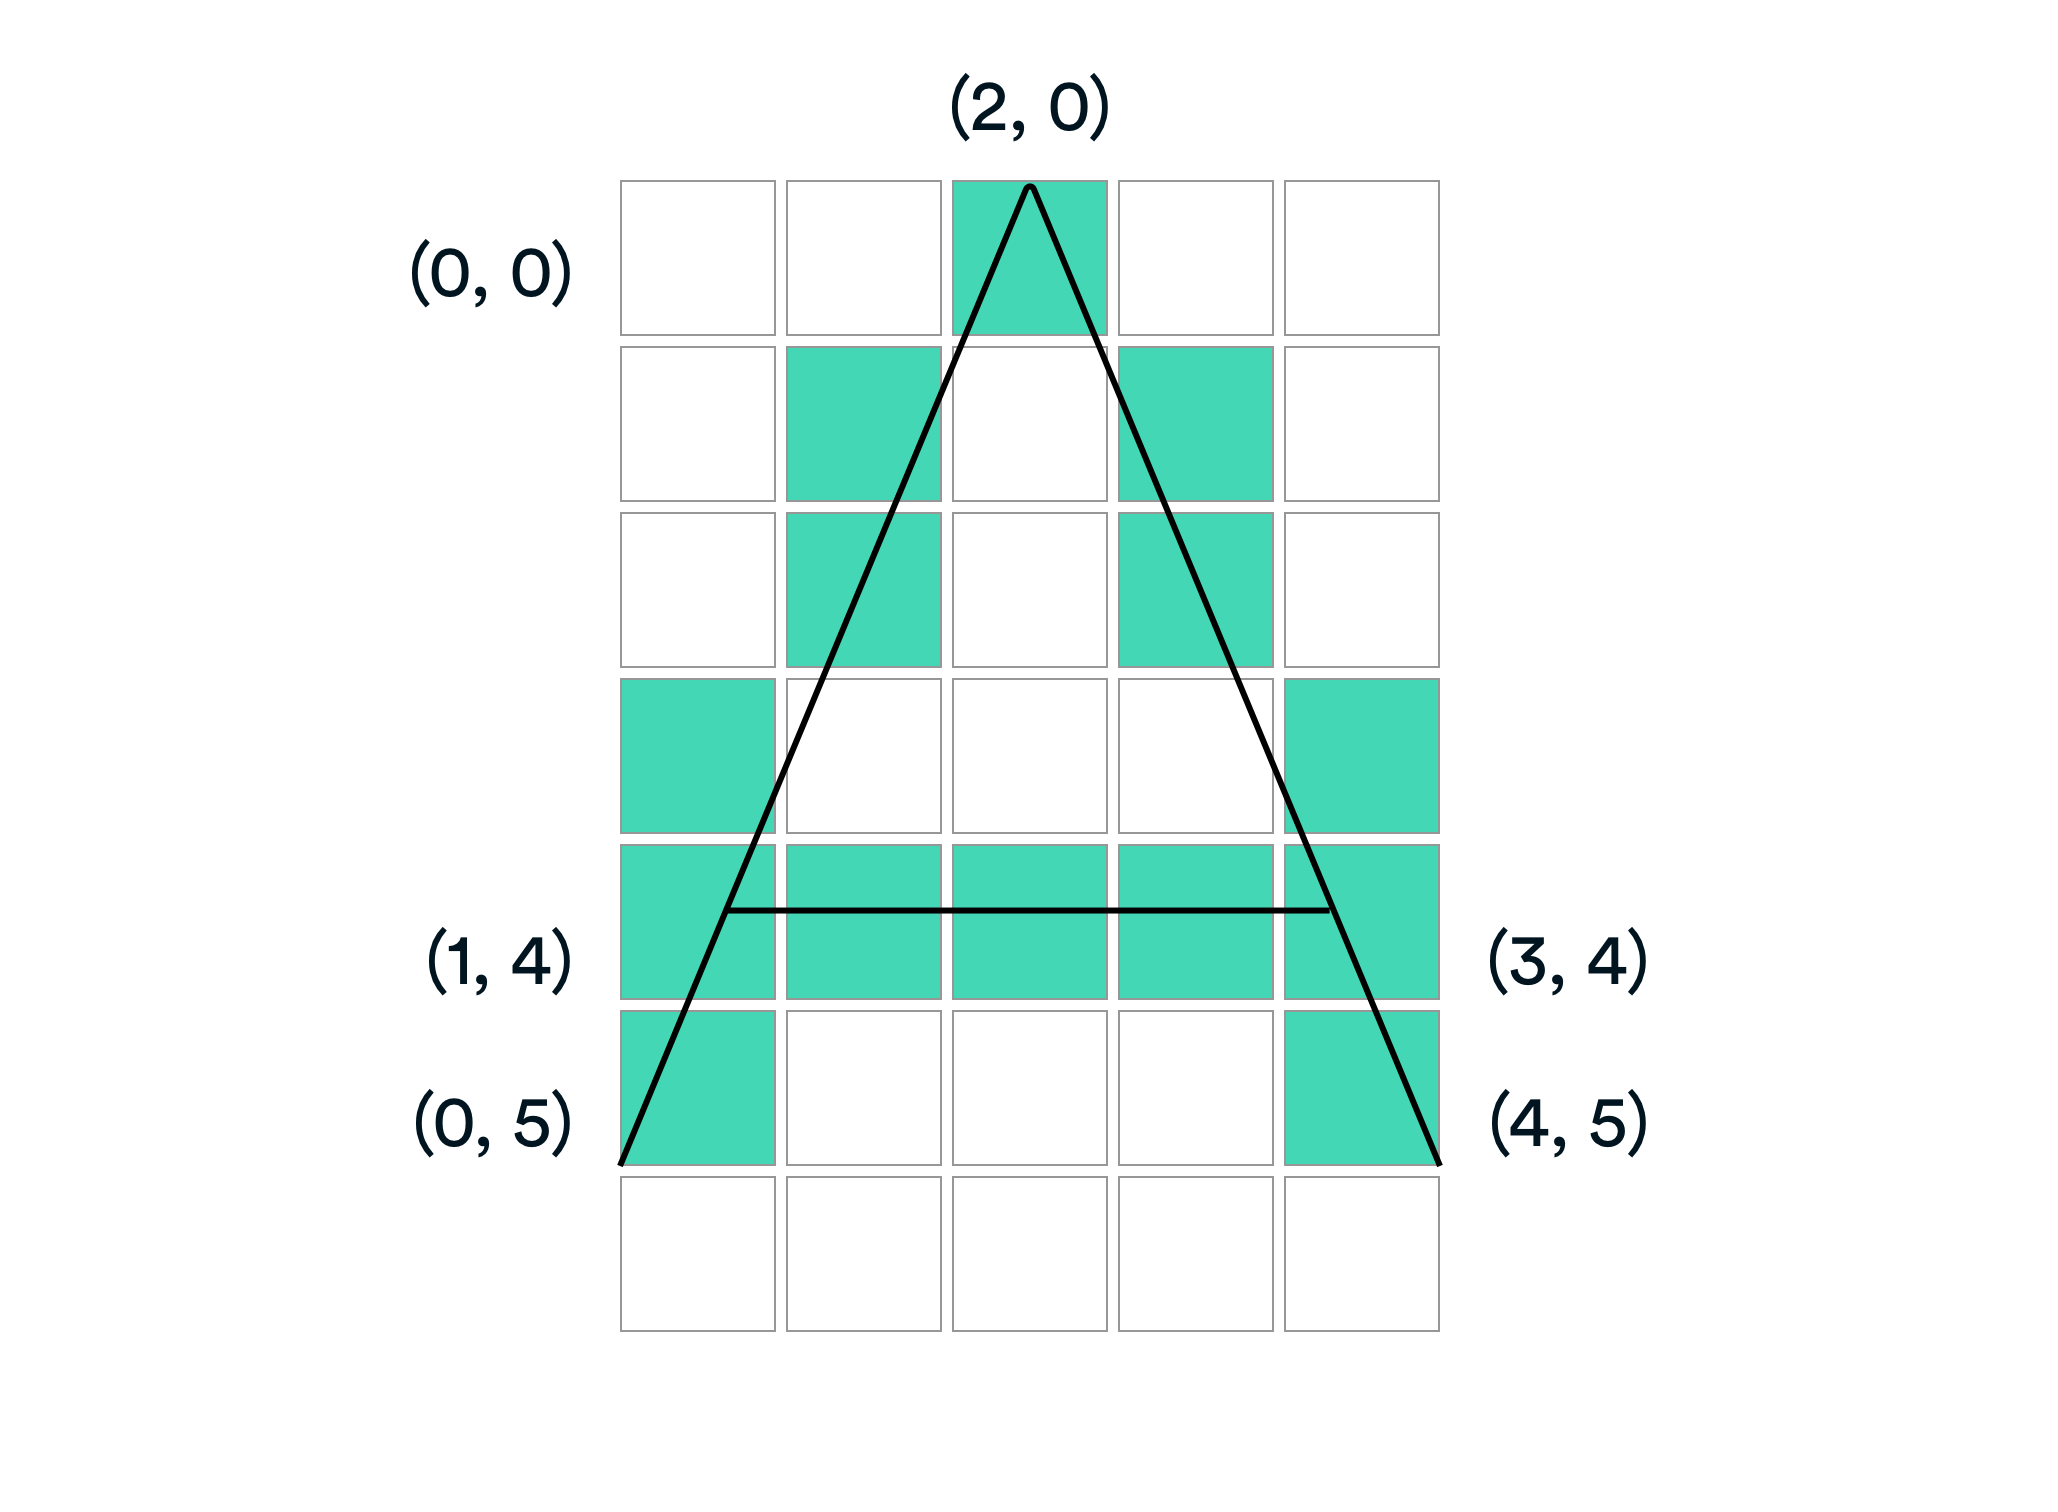 The vector-depiction of the letter “A” overlaying the bitmap-depiction of the letter “A” on a 5x7 grid.